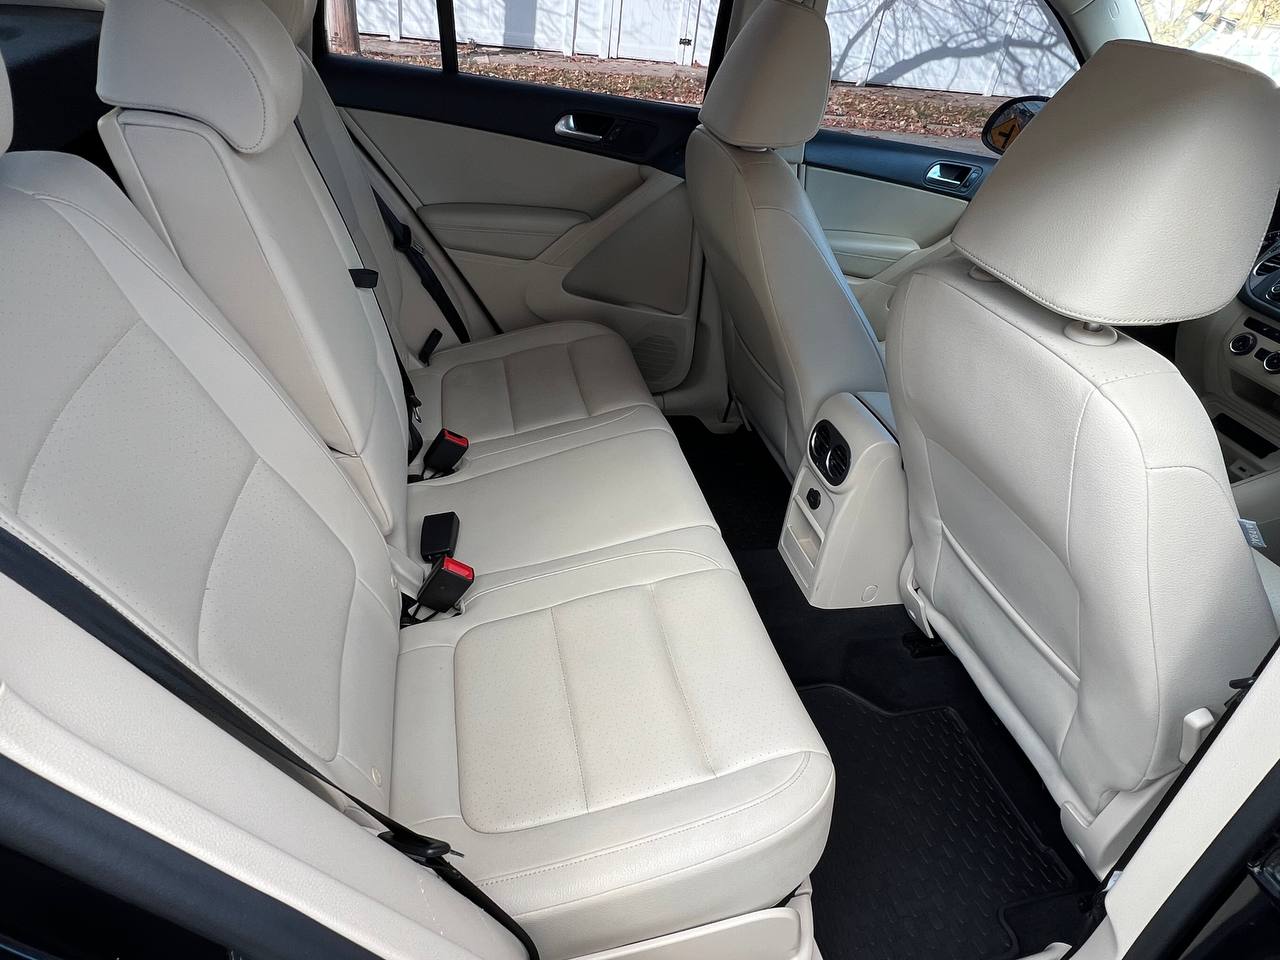 Used - Volkswagen Tiguan 2.0T S 4Motion AWD SUV for sale in Staten Island NY